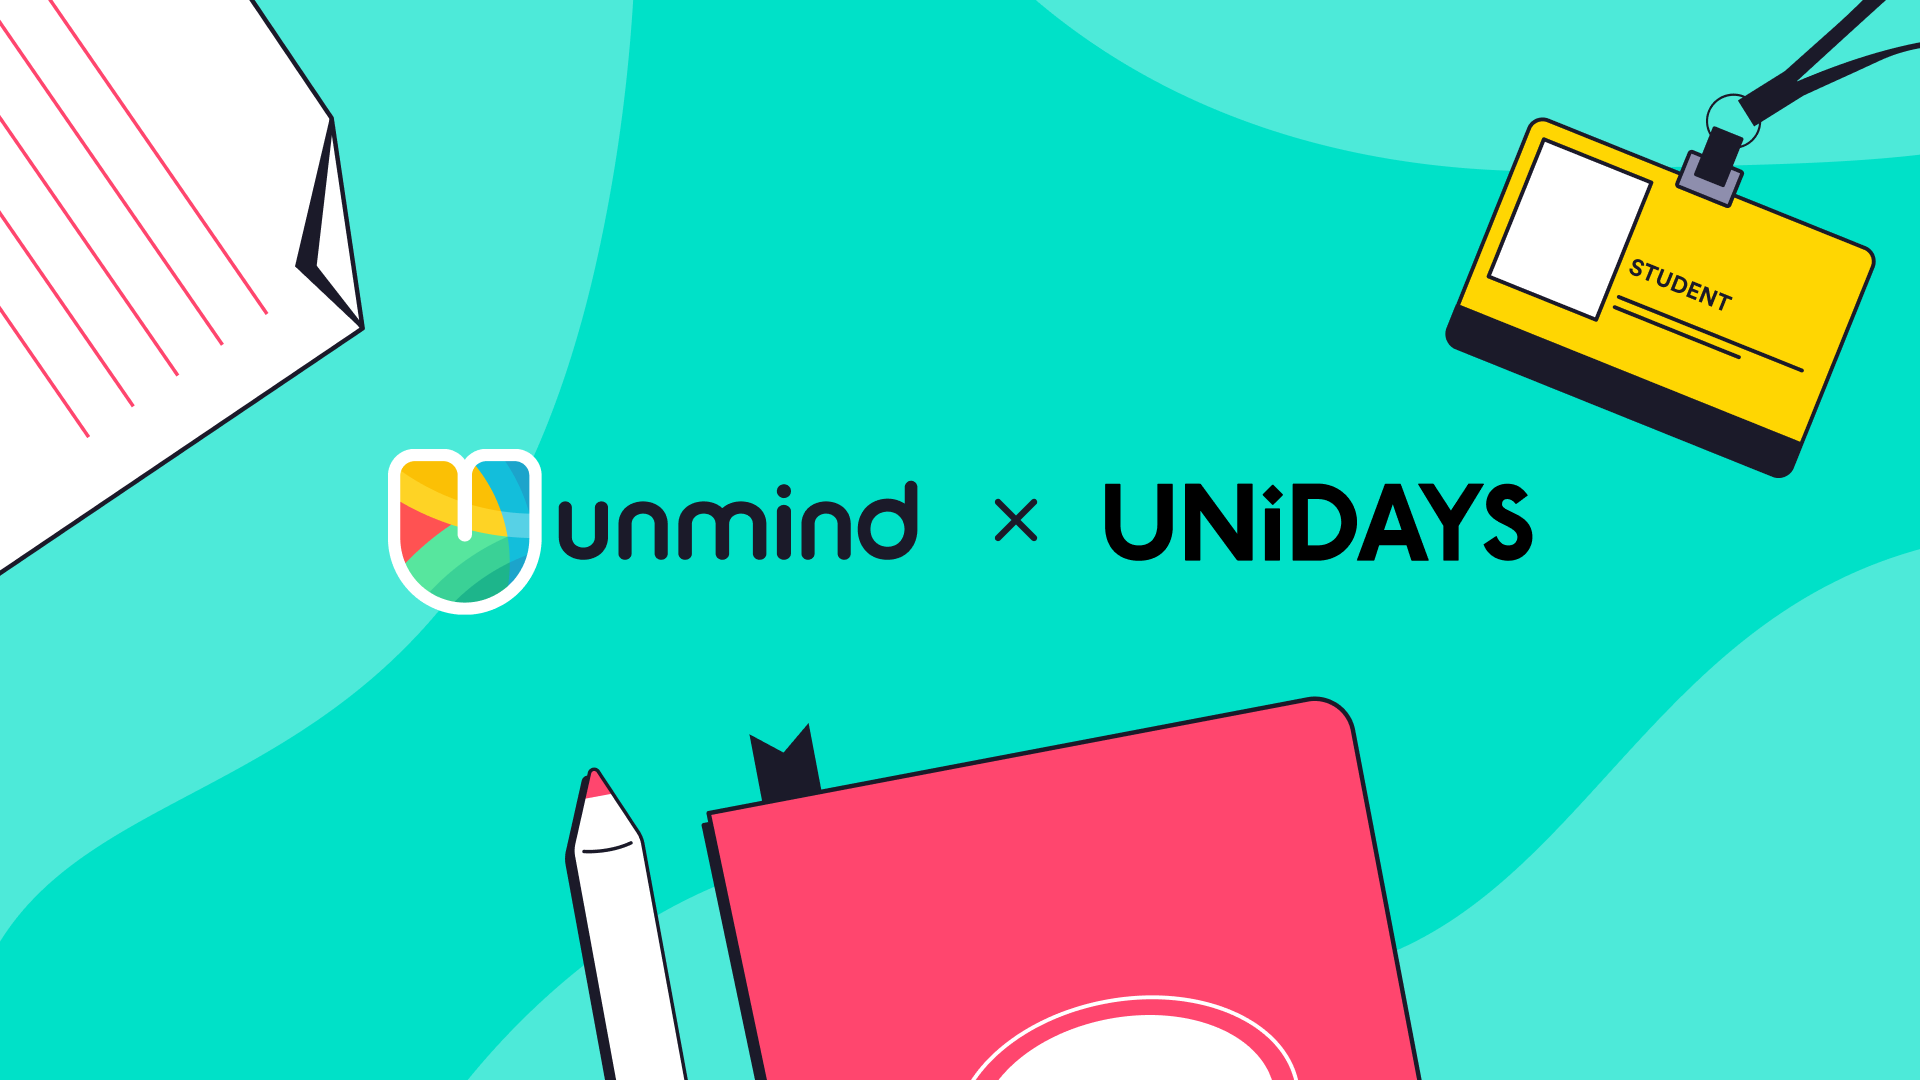 Free for students with UNiDAYS